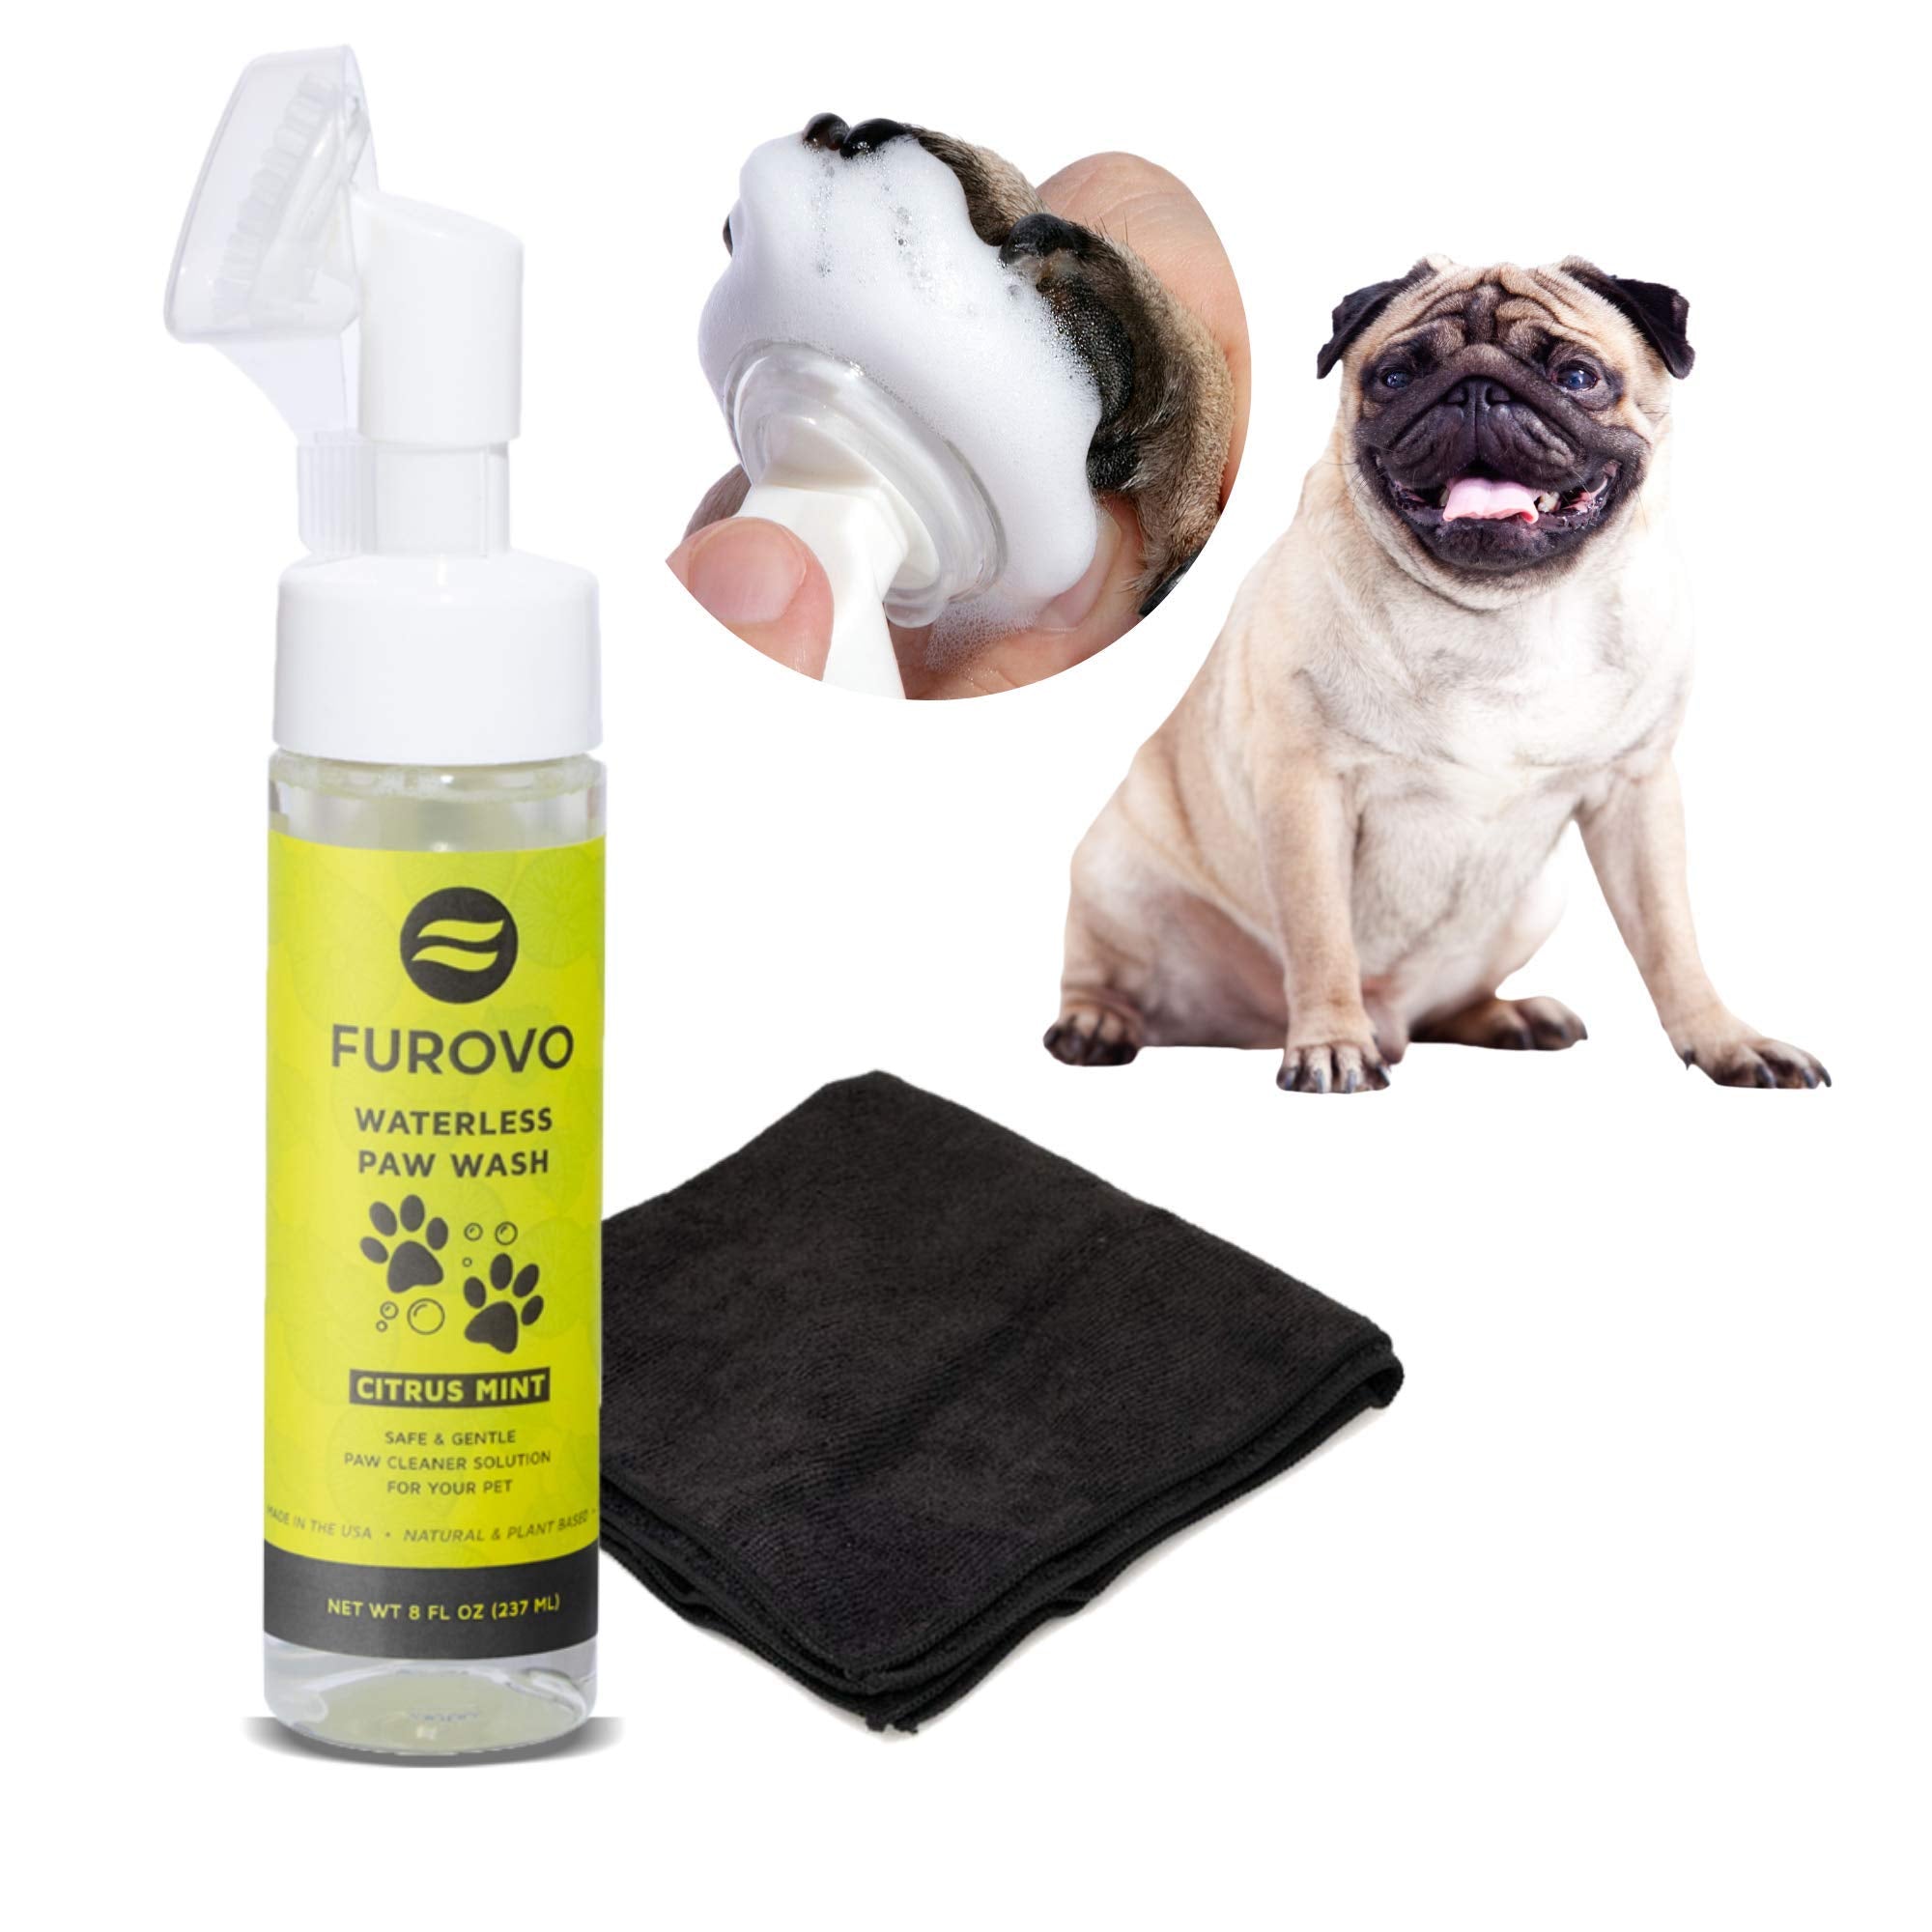 No-Rinse Paw Cleaner Foam, Waterless Dog Shampoo, Naturally Formulated to  Quickly Clean Up Dogs & Cats' Paws